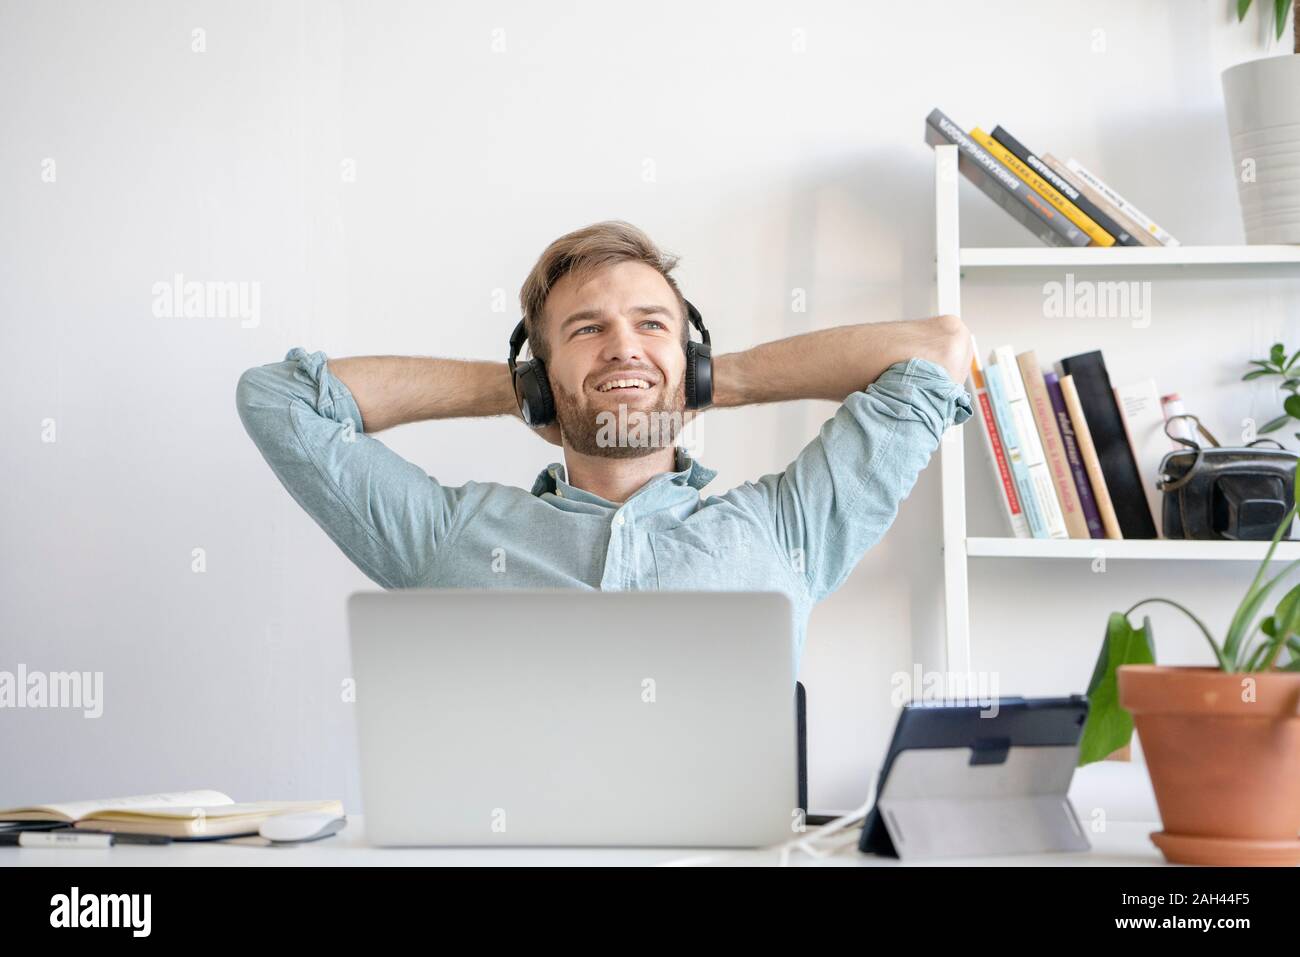 Smiling man listening to music at desk in office Banque D'Images